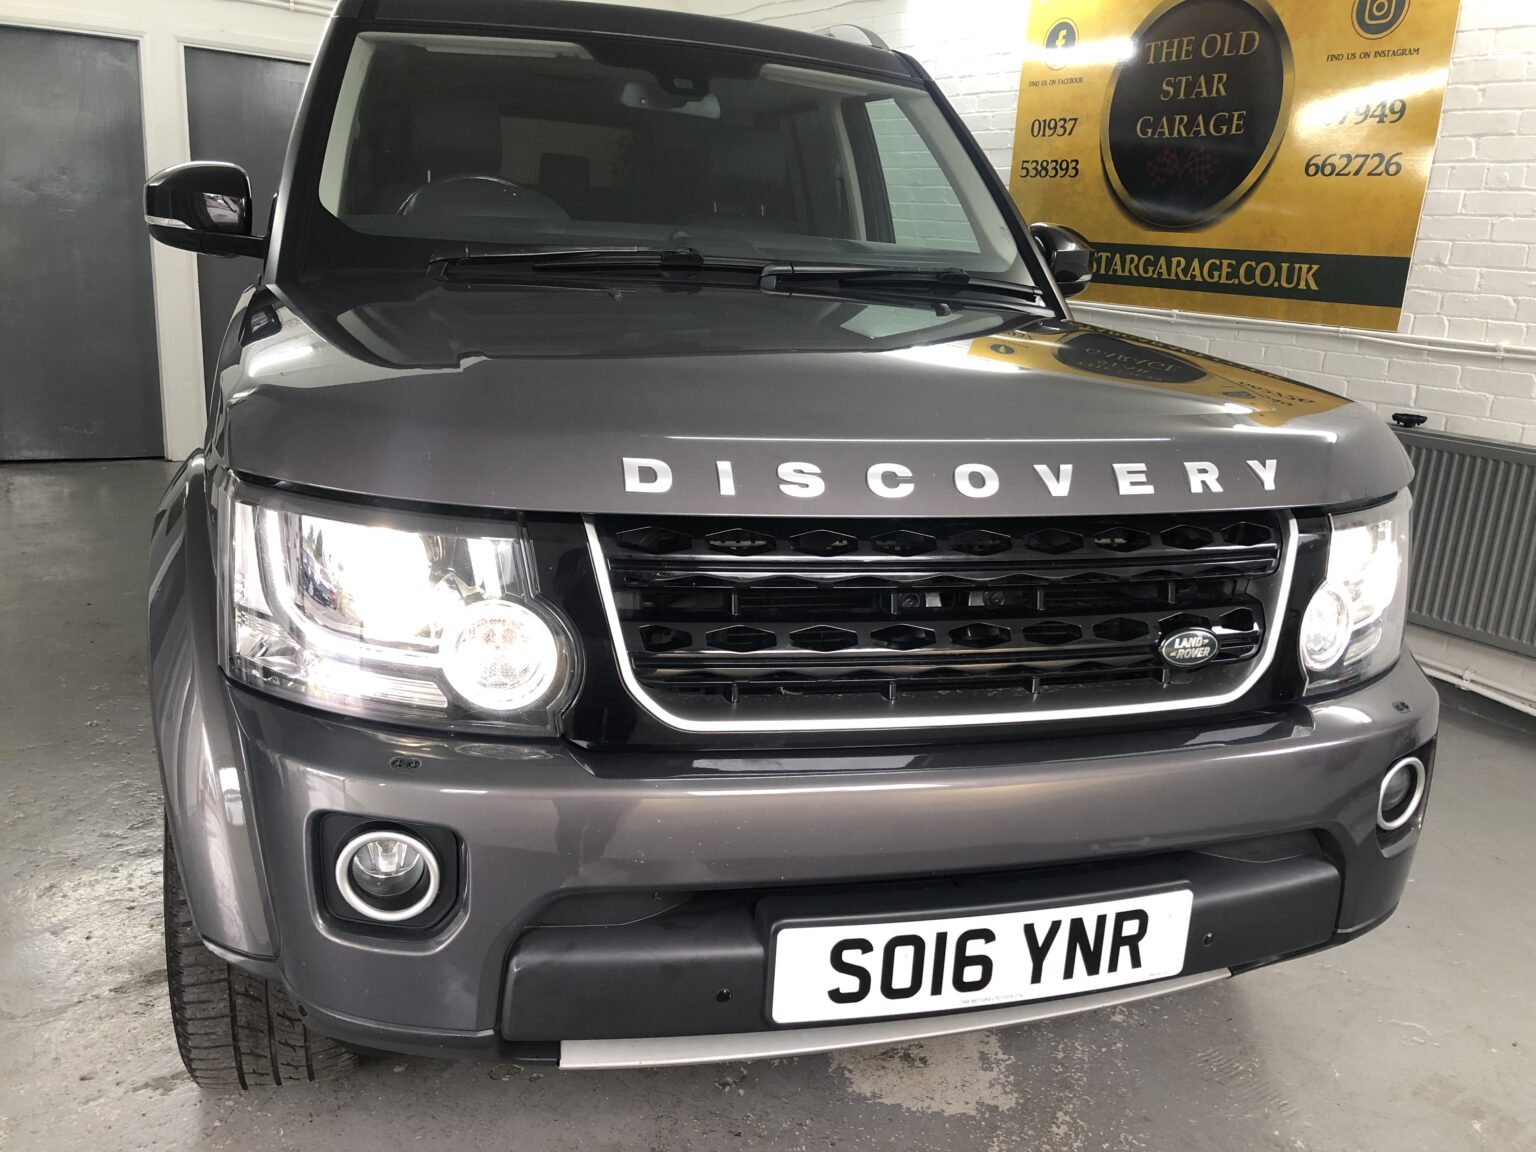 LAND ROVER DISCOVERY 4 LANDMARK – The Old Star Garage